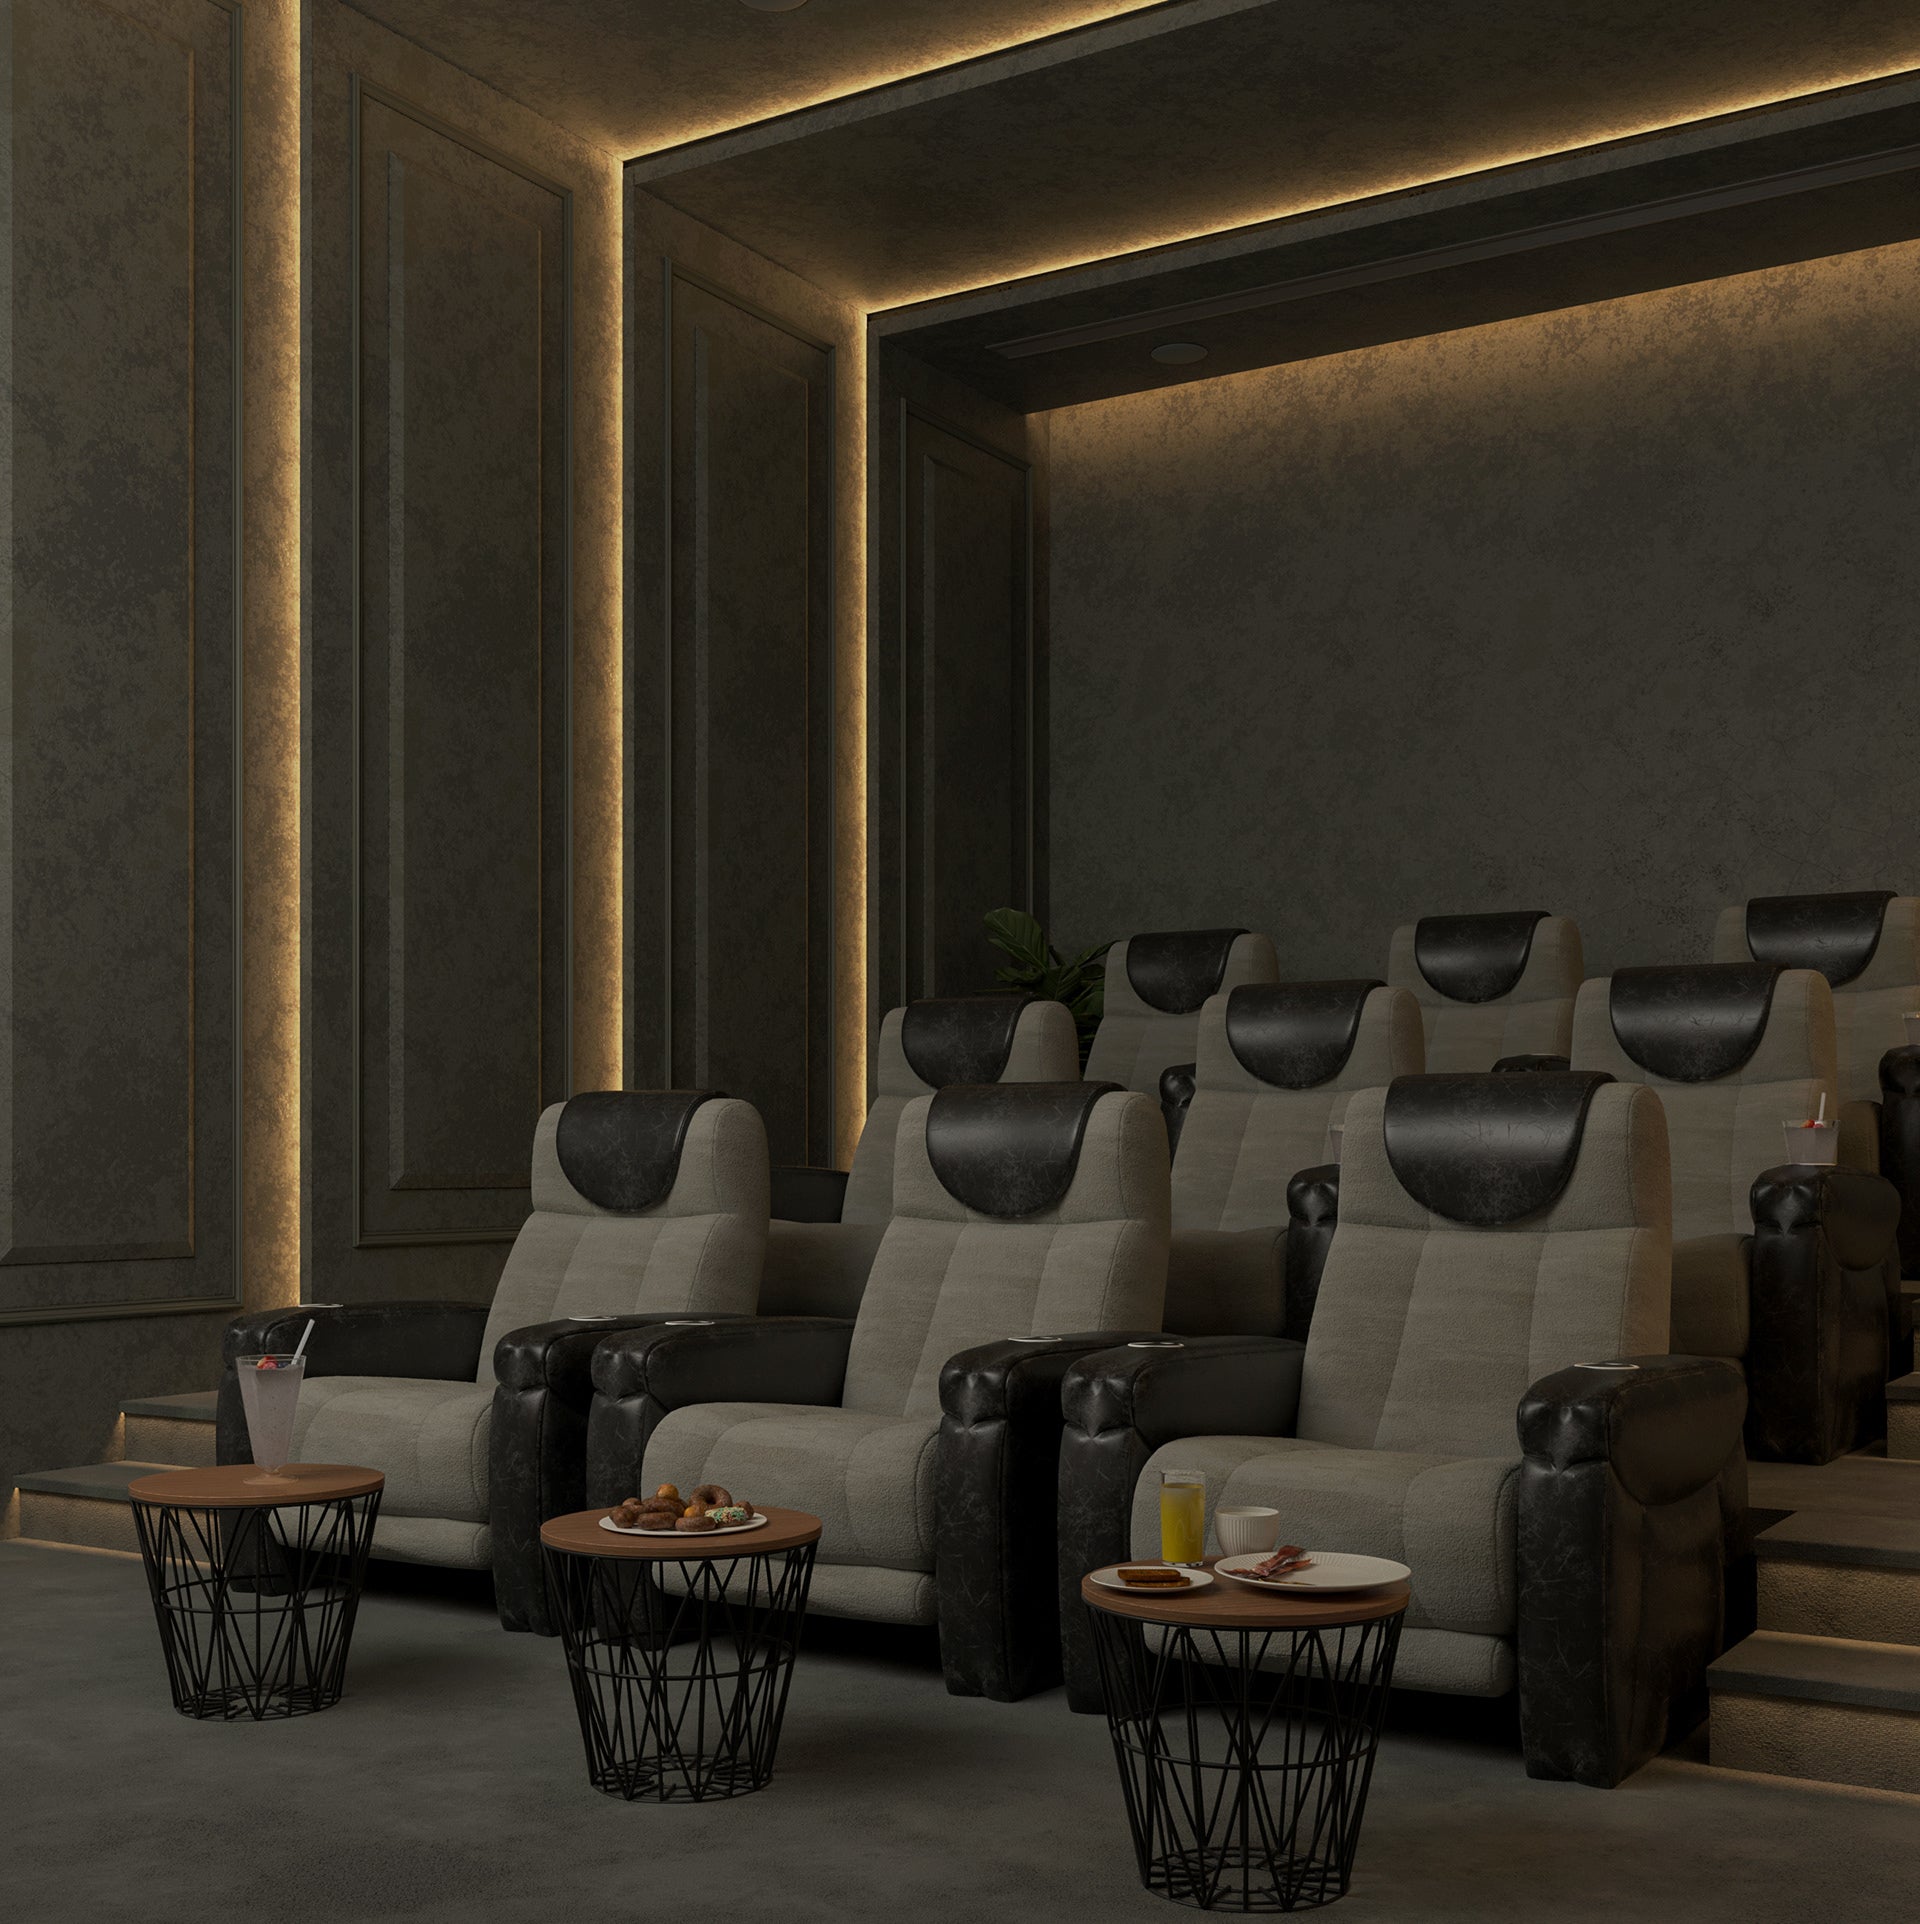 Choosing the Perfect Sofa for Your Home Theater